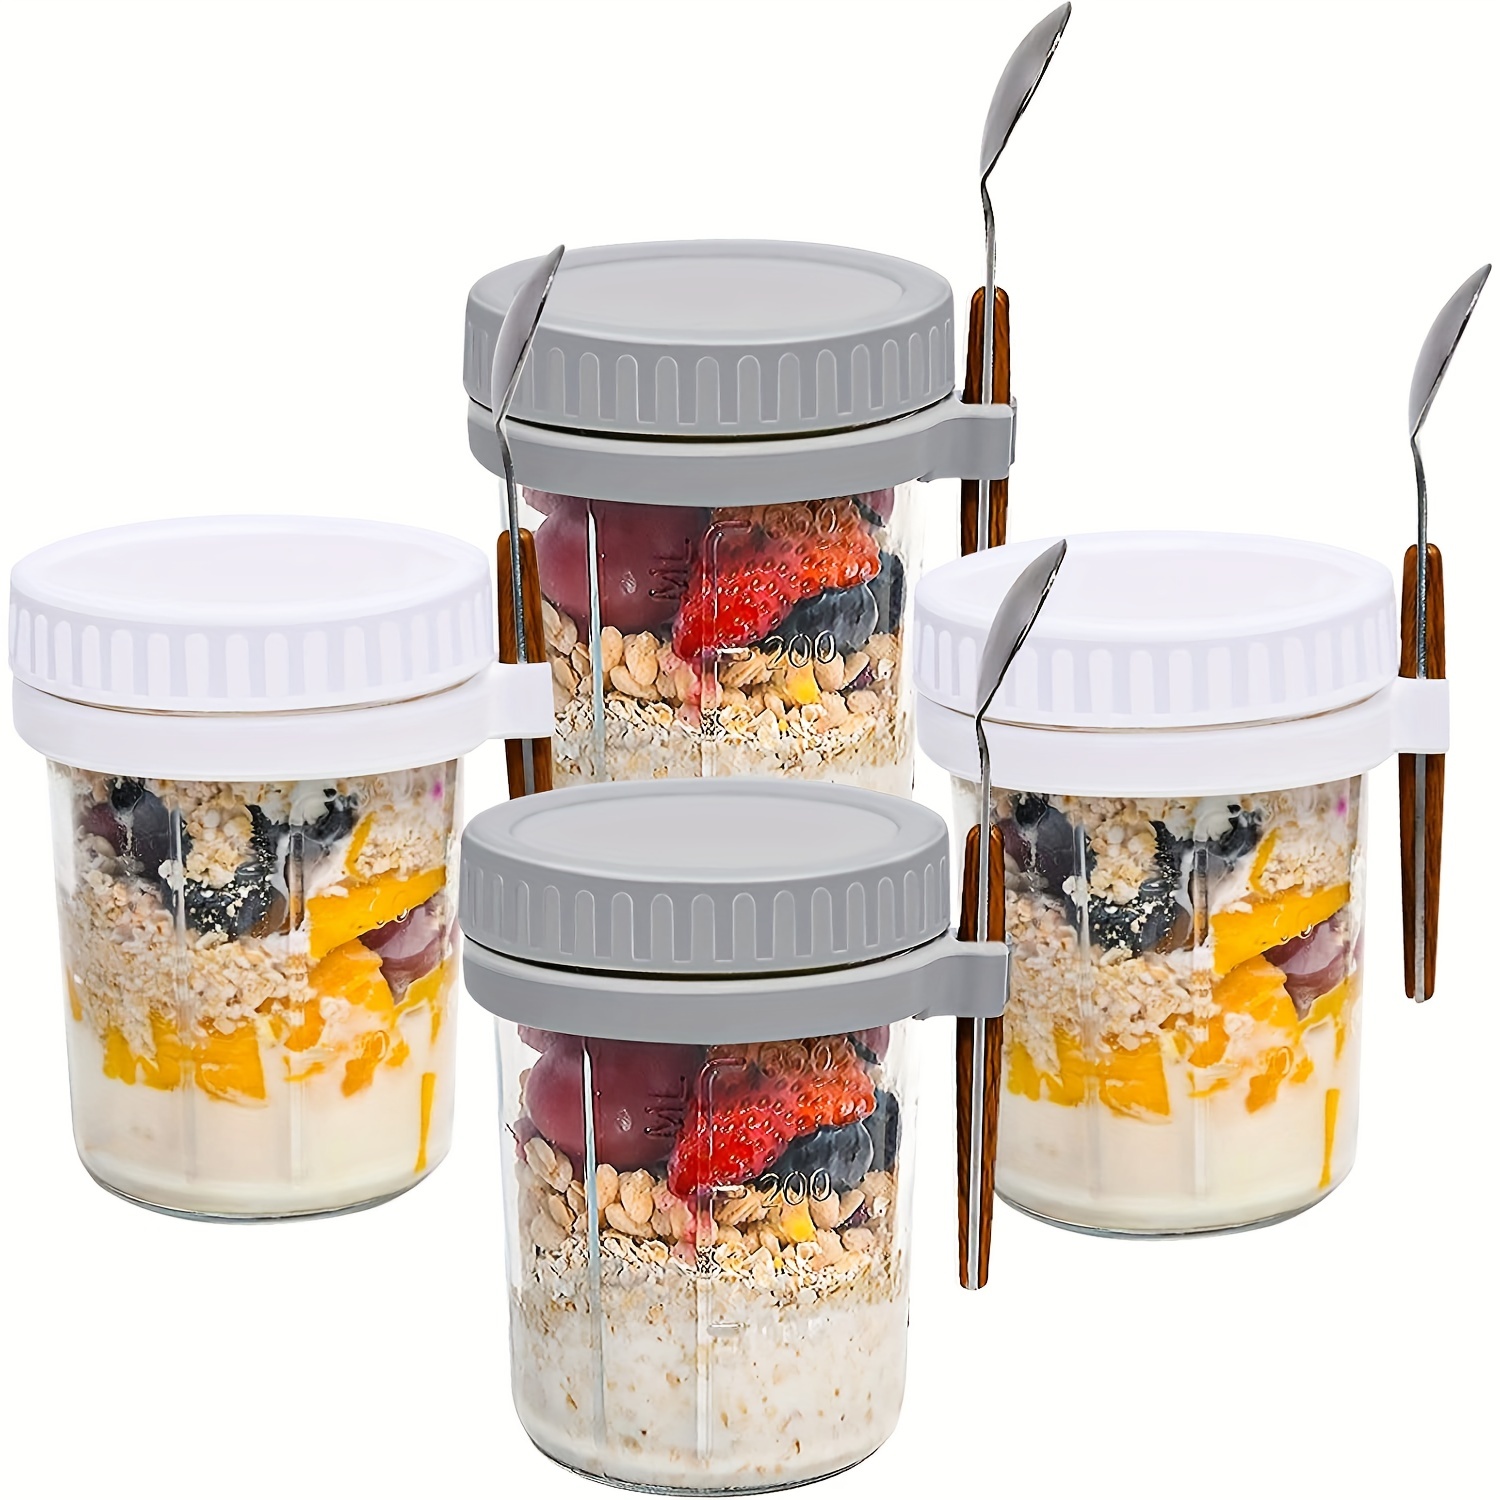 4Pack Overnight Oats Jar Glass With Lids And Spoons, Reusable